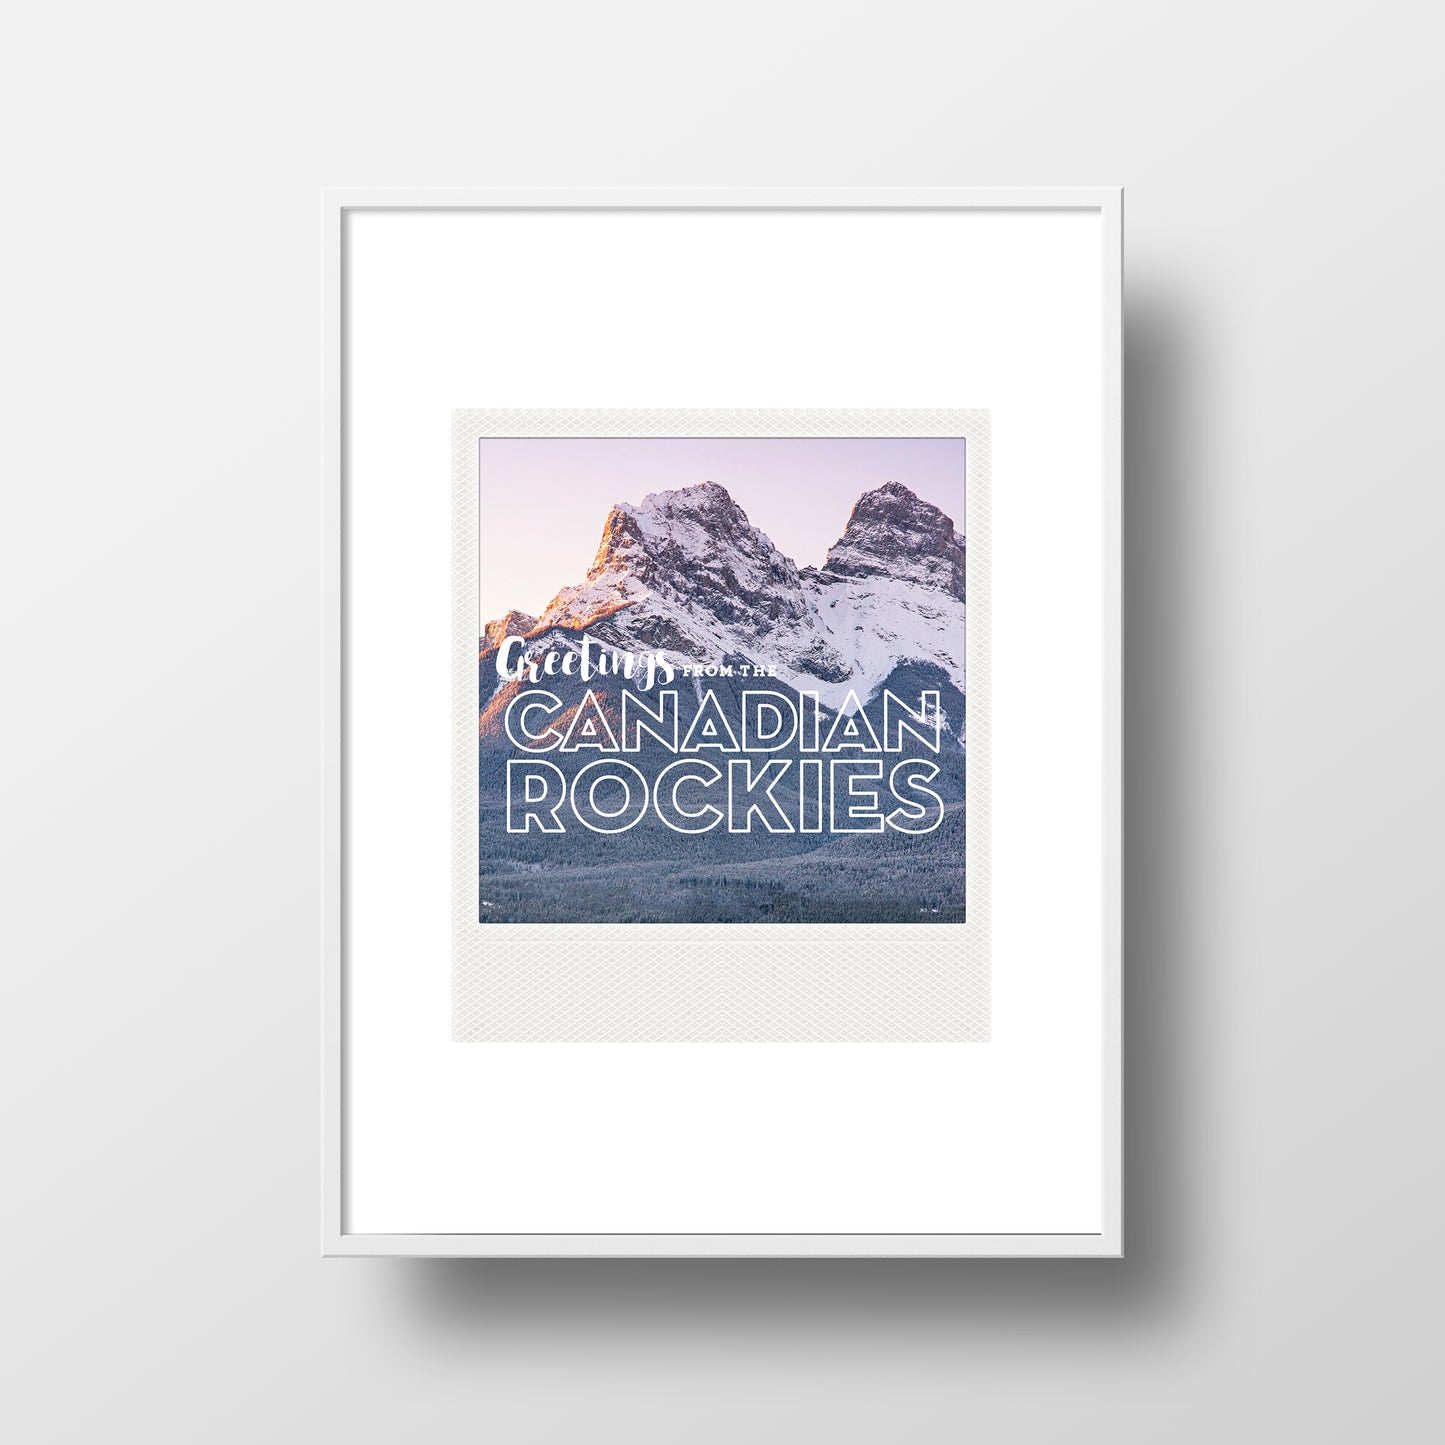 Metallic Polaroid Magnet <br> Greetings from the Canadian Rockies <br> Canmore